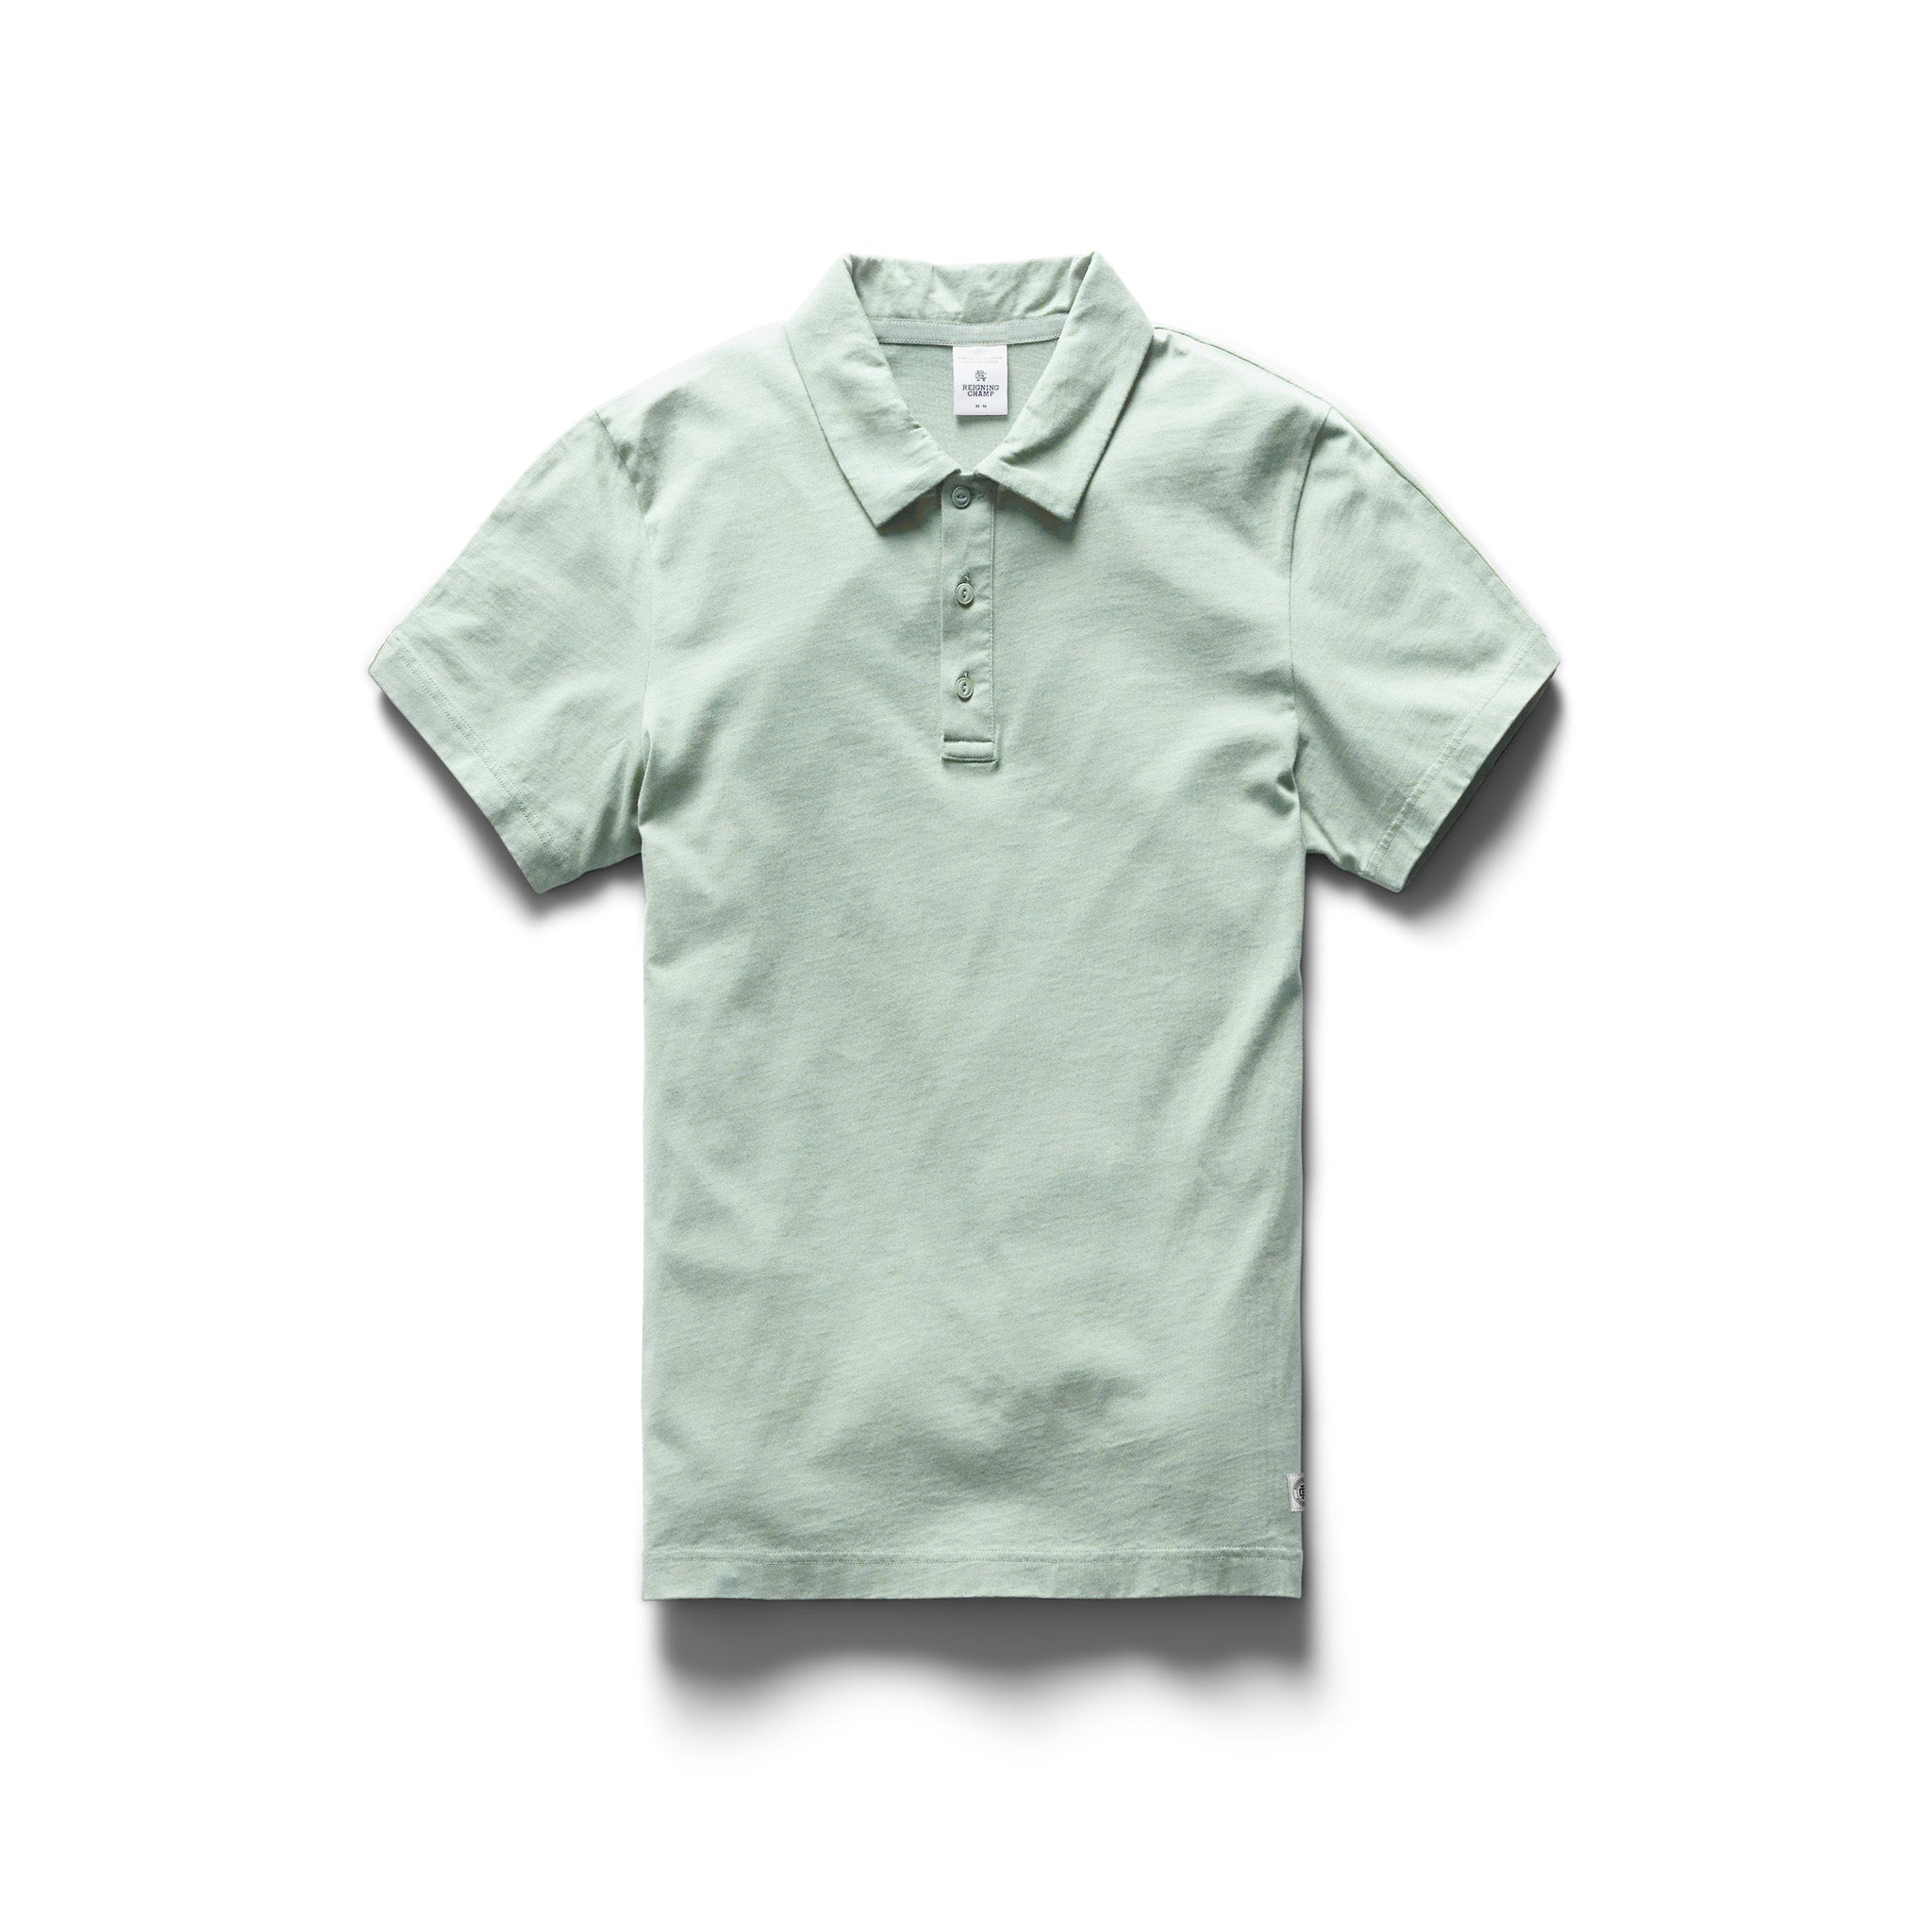 Lightweight Jersey Polo | Reigning Champ